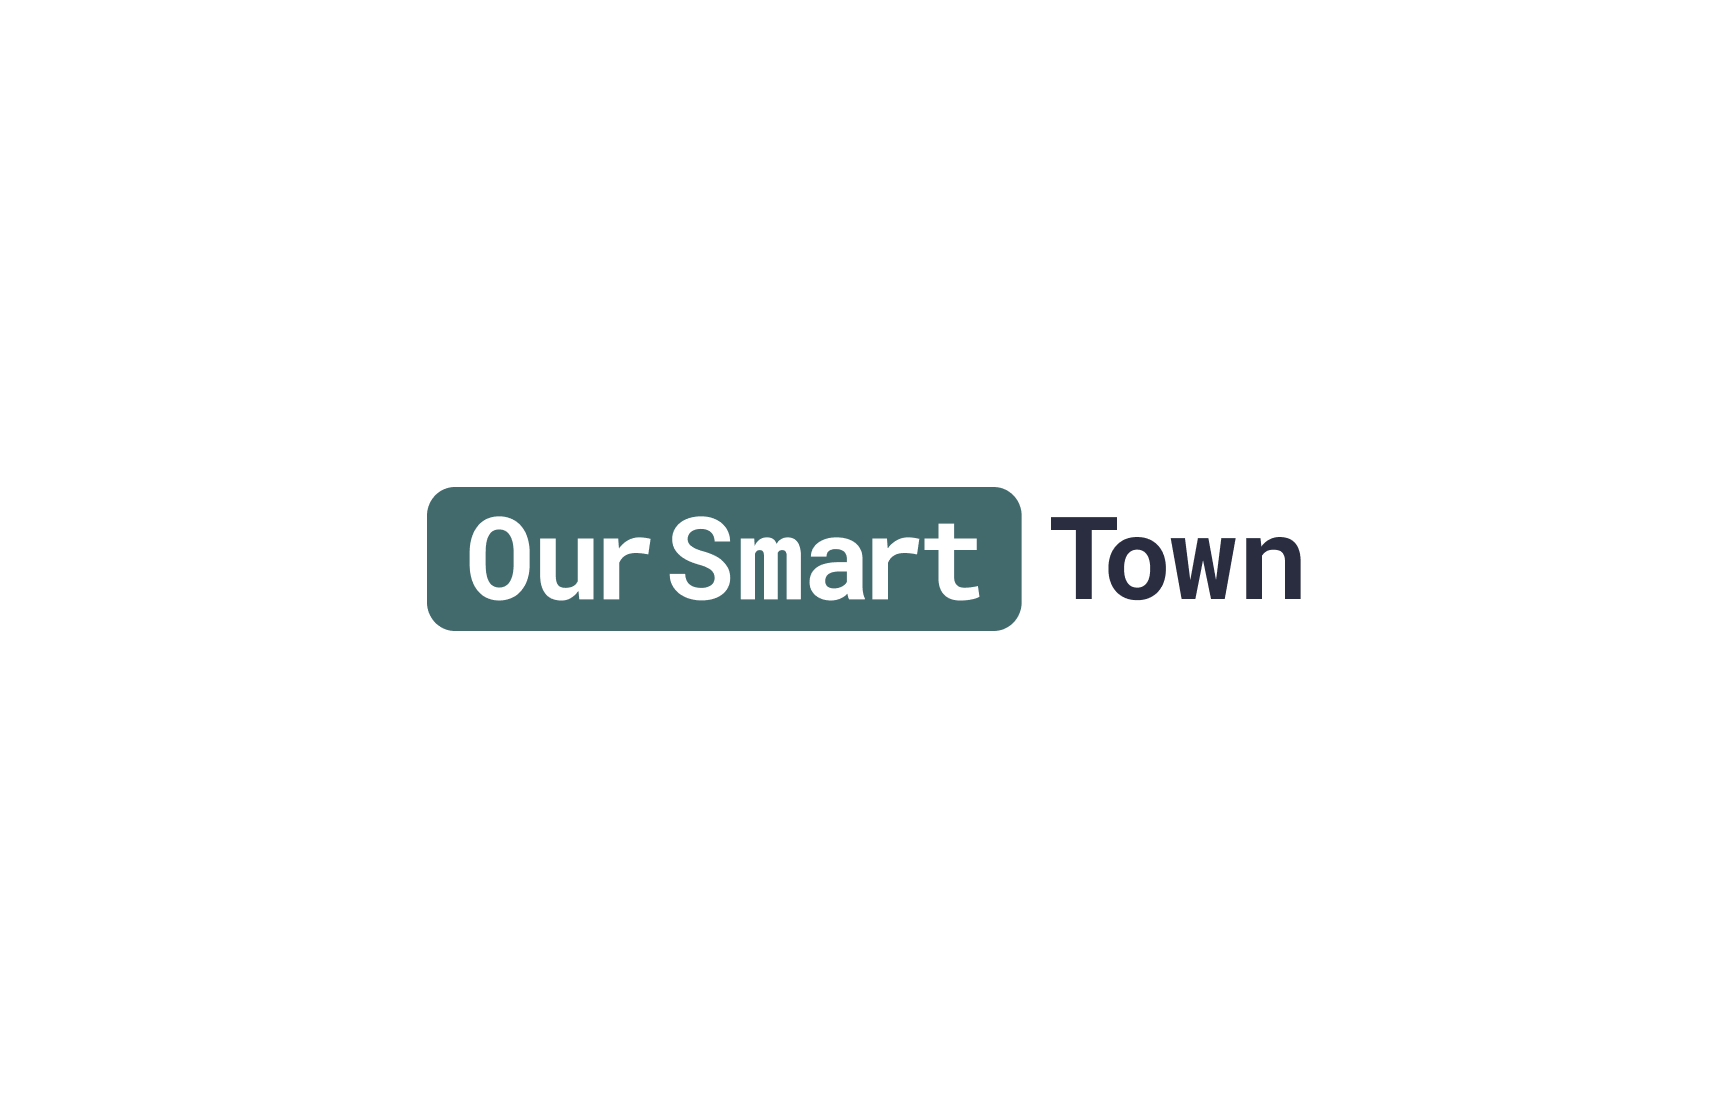 OurSmart Town GMBH